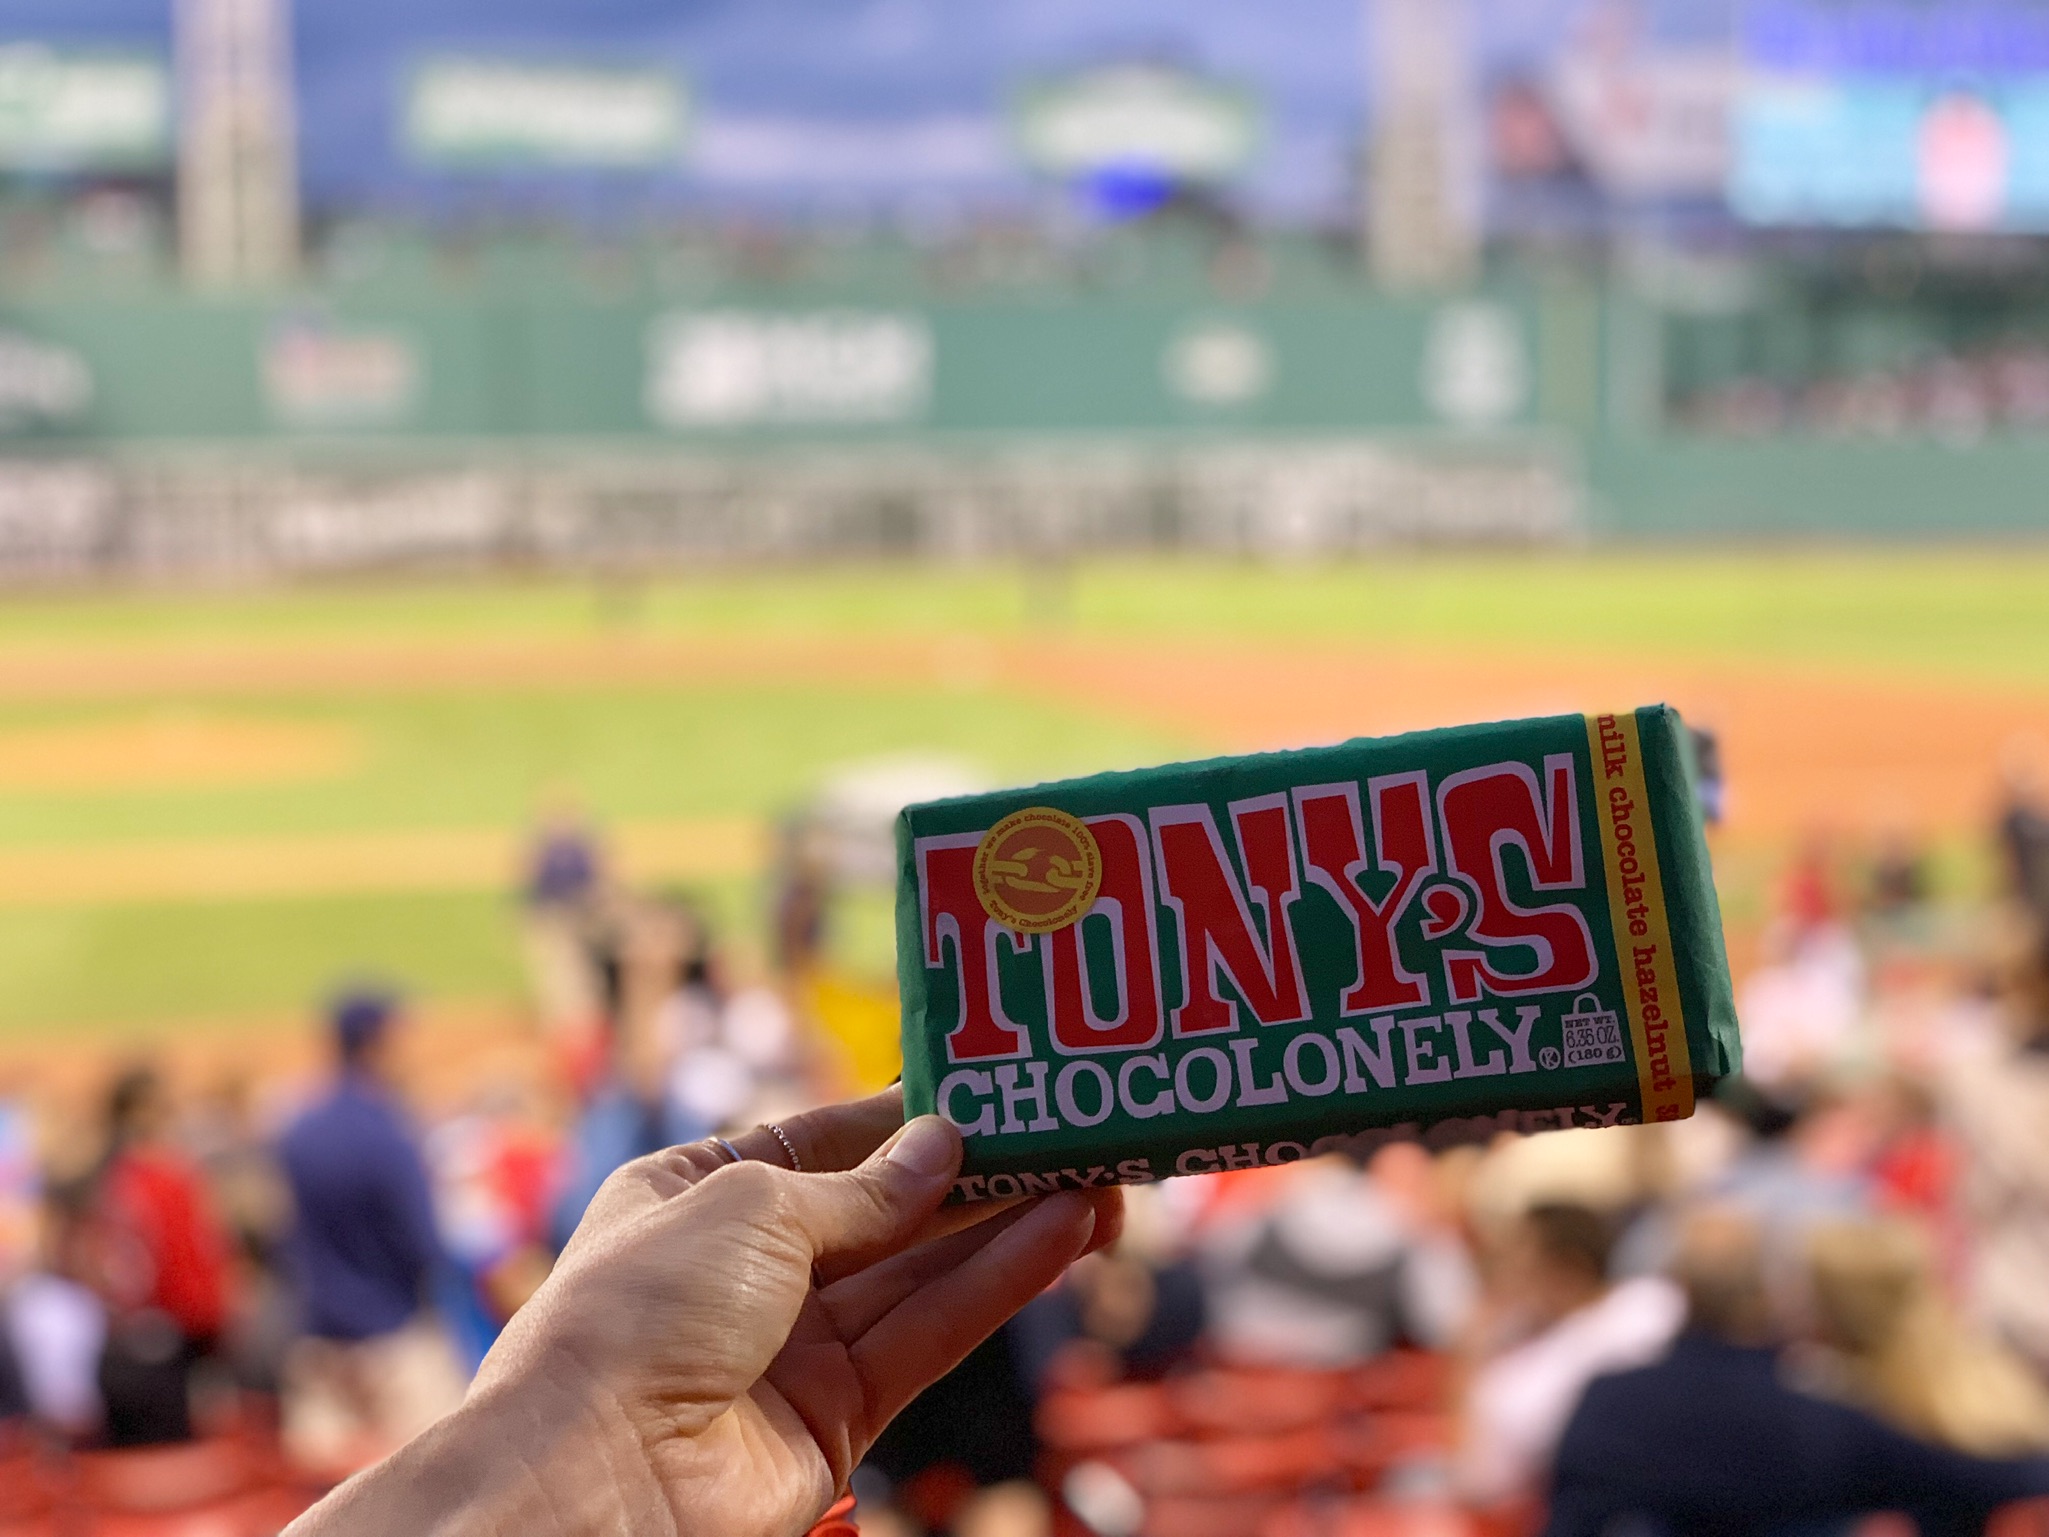 Our Bean to Bar Journey is shipping up to Baaahston! After a pit stop at&nbsp;<a class="" href="https://www.instagram.com/explore/tags/fenway/">#Fenway</a>&nbsp;Park, we&rsquo;re kicking off a fun week in&nbsp;<a class="" href="https://www.instagram.com/explore/tags/boston/">#Boston</a>&nbsp;at Northeastern University followed by other wicked awesome events at&nbsp;<a class="" href="https://www.instagram.com/explore/tags/harvard/">#Harvard</a>&nbsp;Square, Kendall Square, the South End Street Festival and the Natick Mall. Click the link in our bio for all the deets!&nbsp;<a class="" href="https://www.instagram.com/explore/tags/tonyschocolonely/">#tonyschocolonely</a>